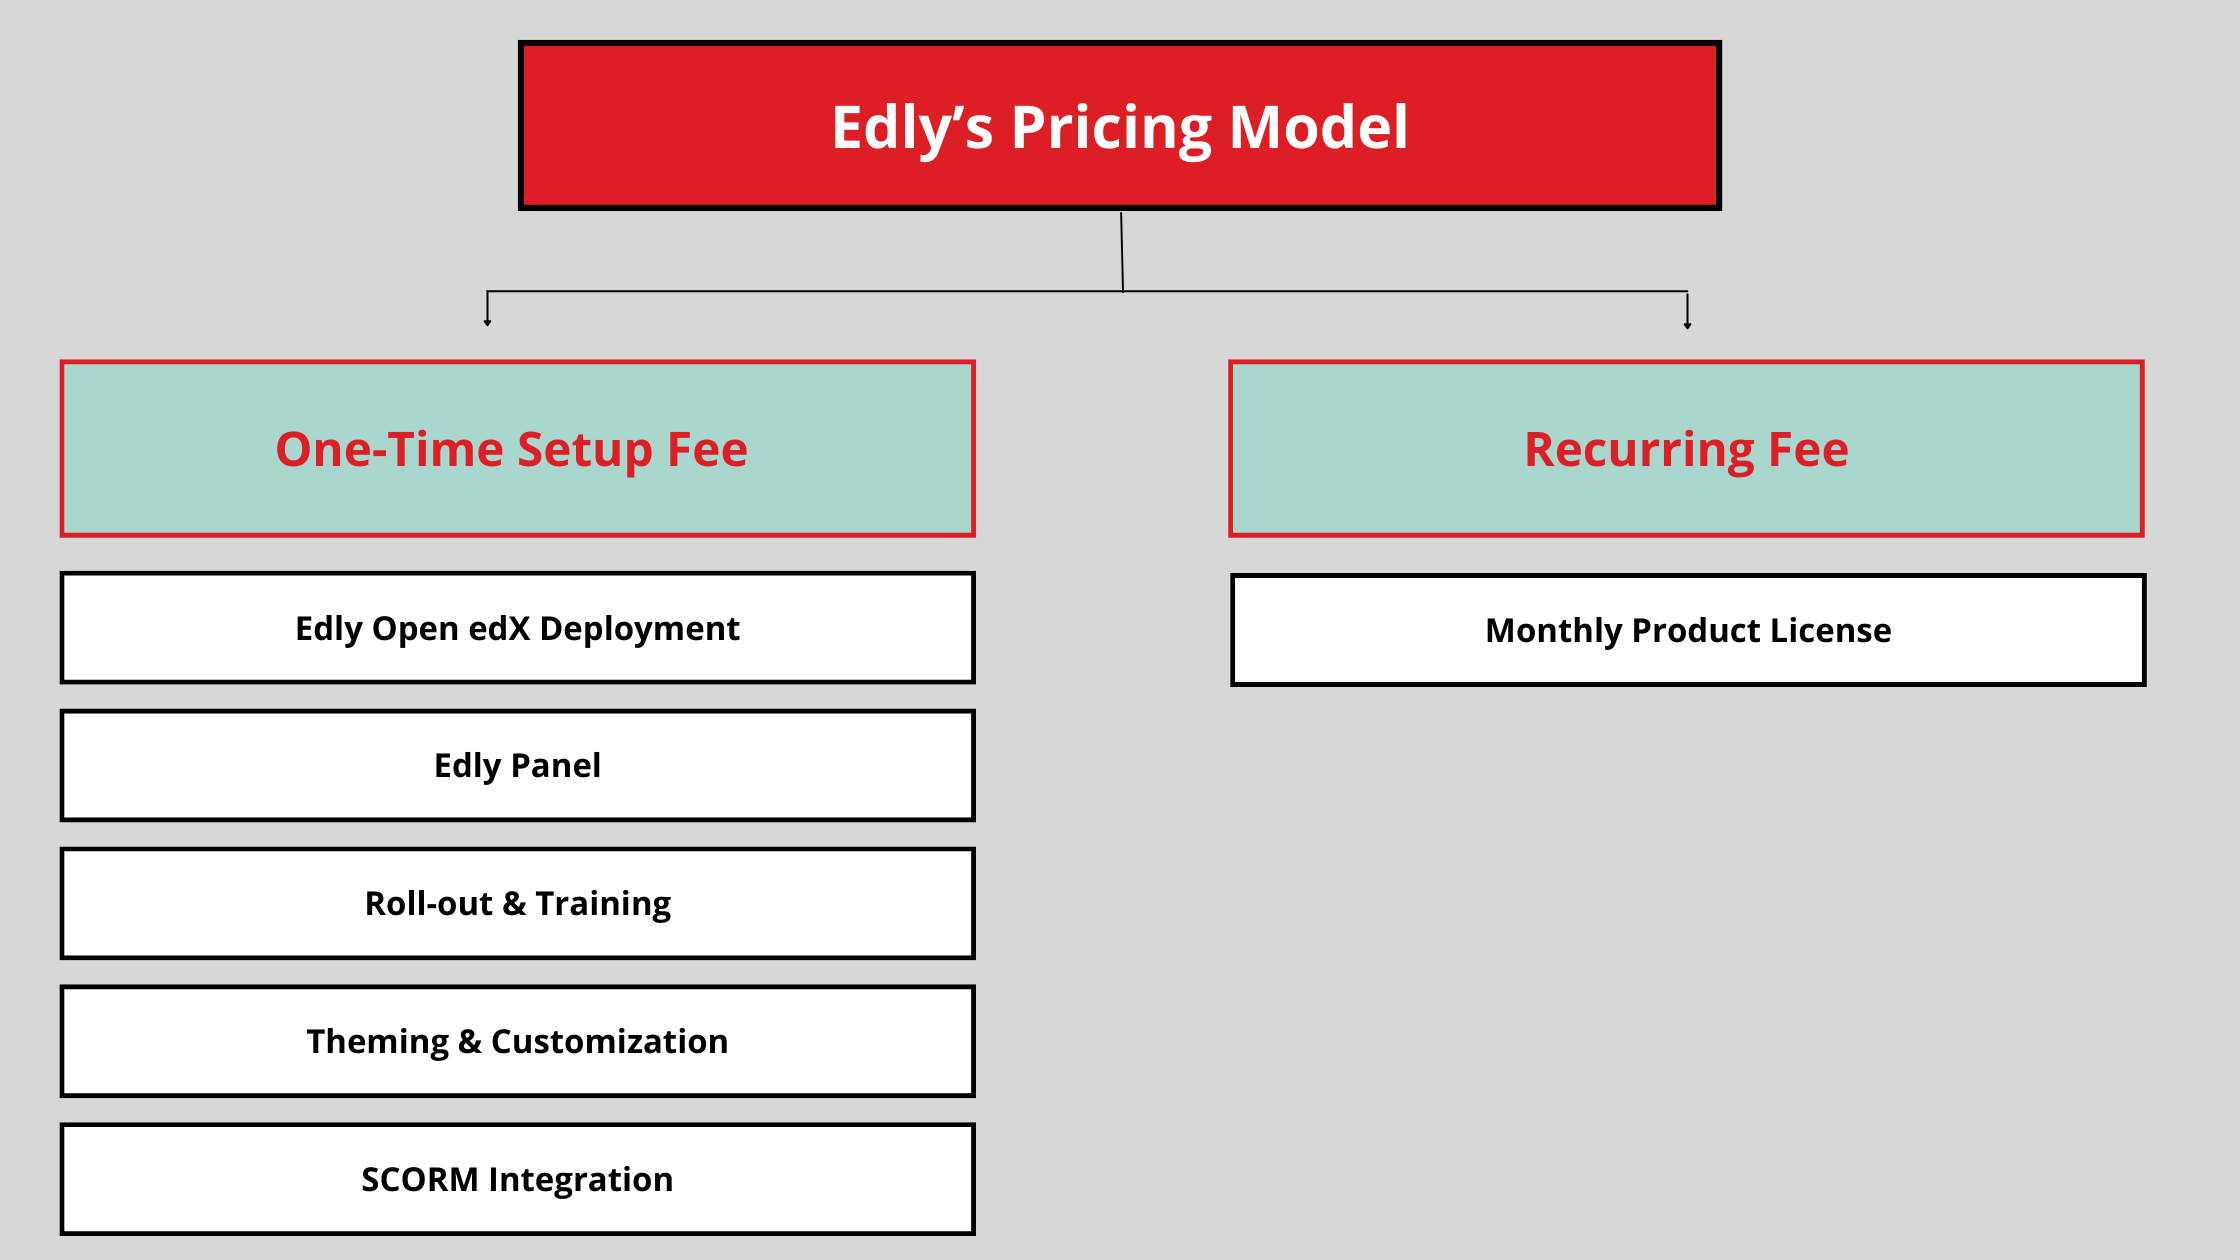 Edly's LMS pricing model